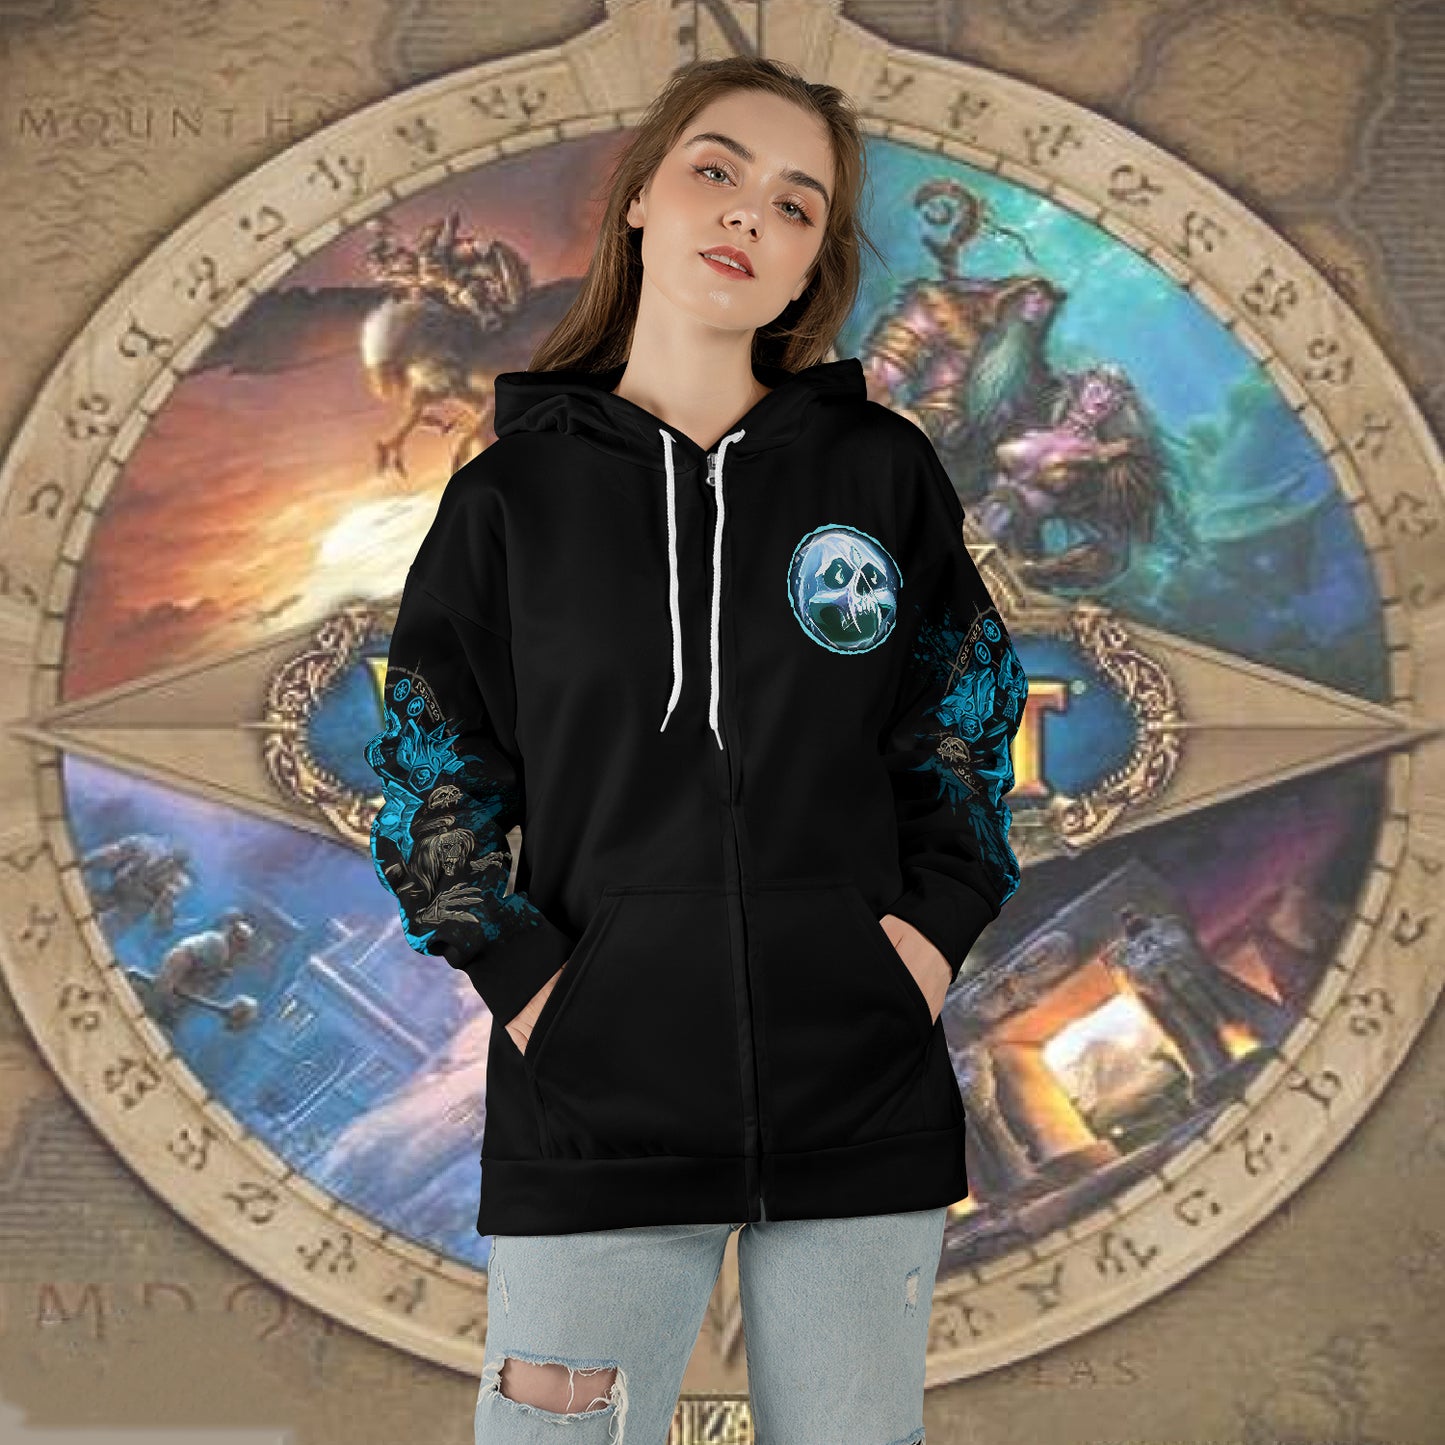 WoW Class Frost Death Knight Guide V1 All-over Print Zip Hoodie